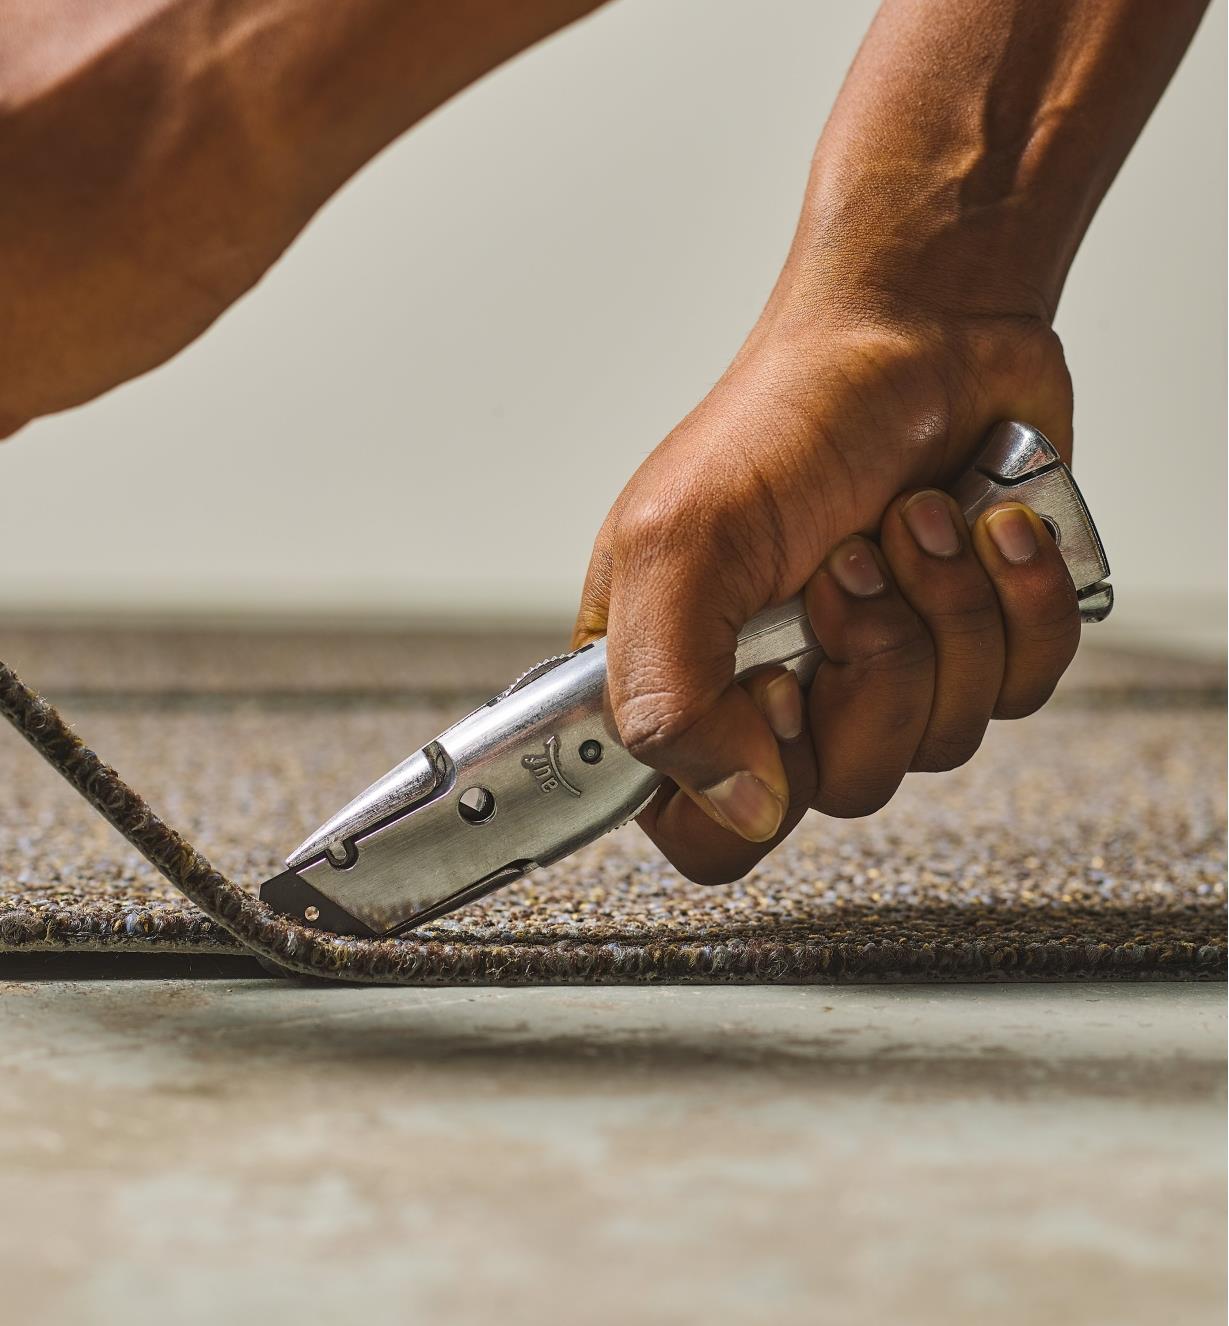 The Delphin 03 utility knife being used to cut carpeting